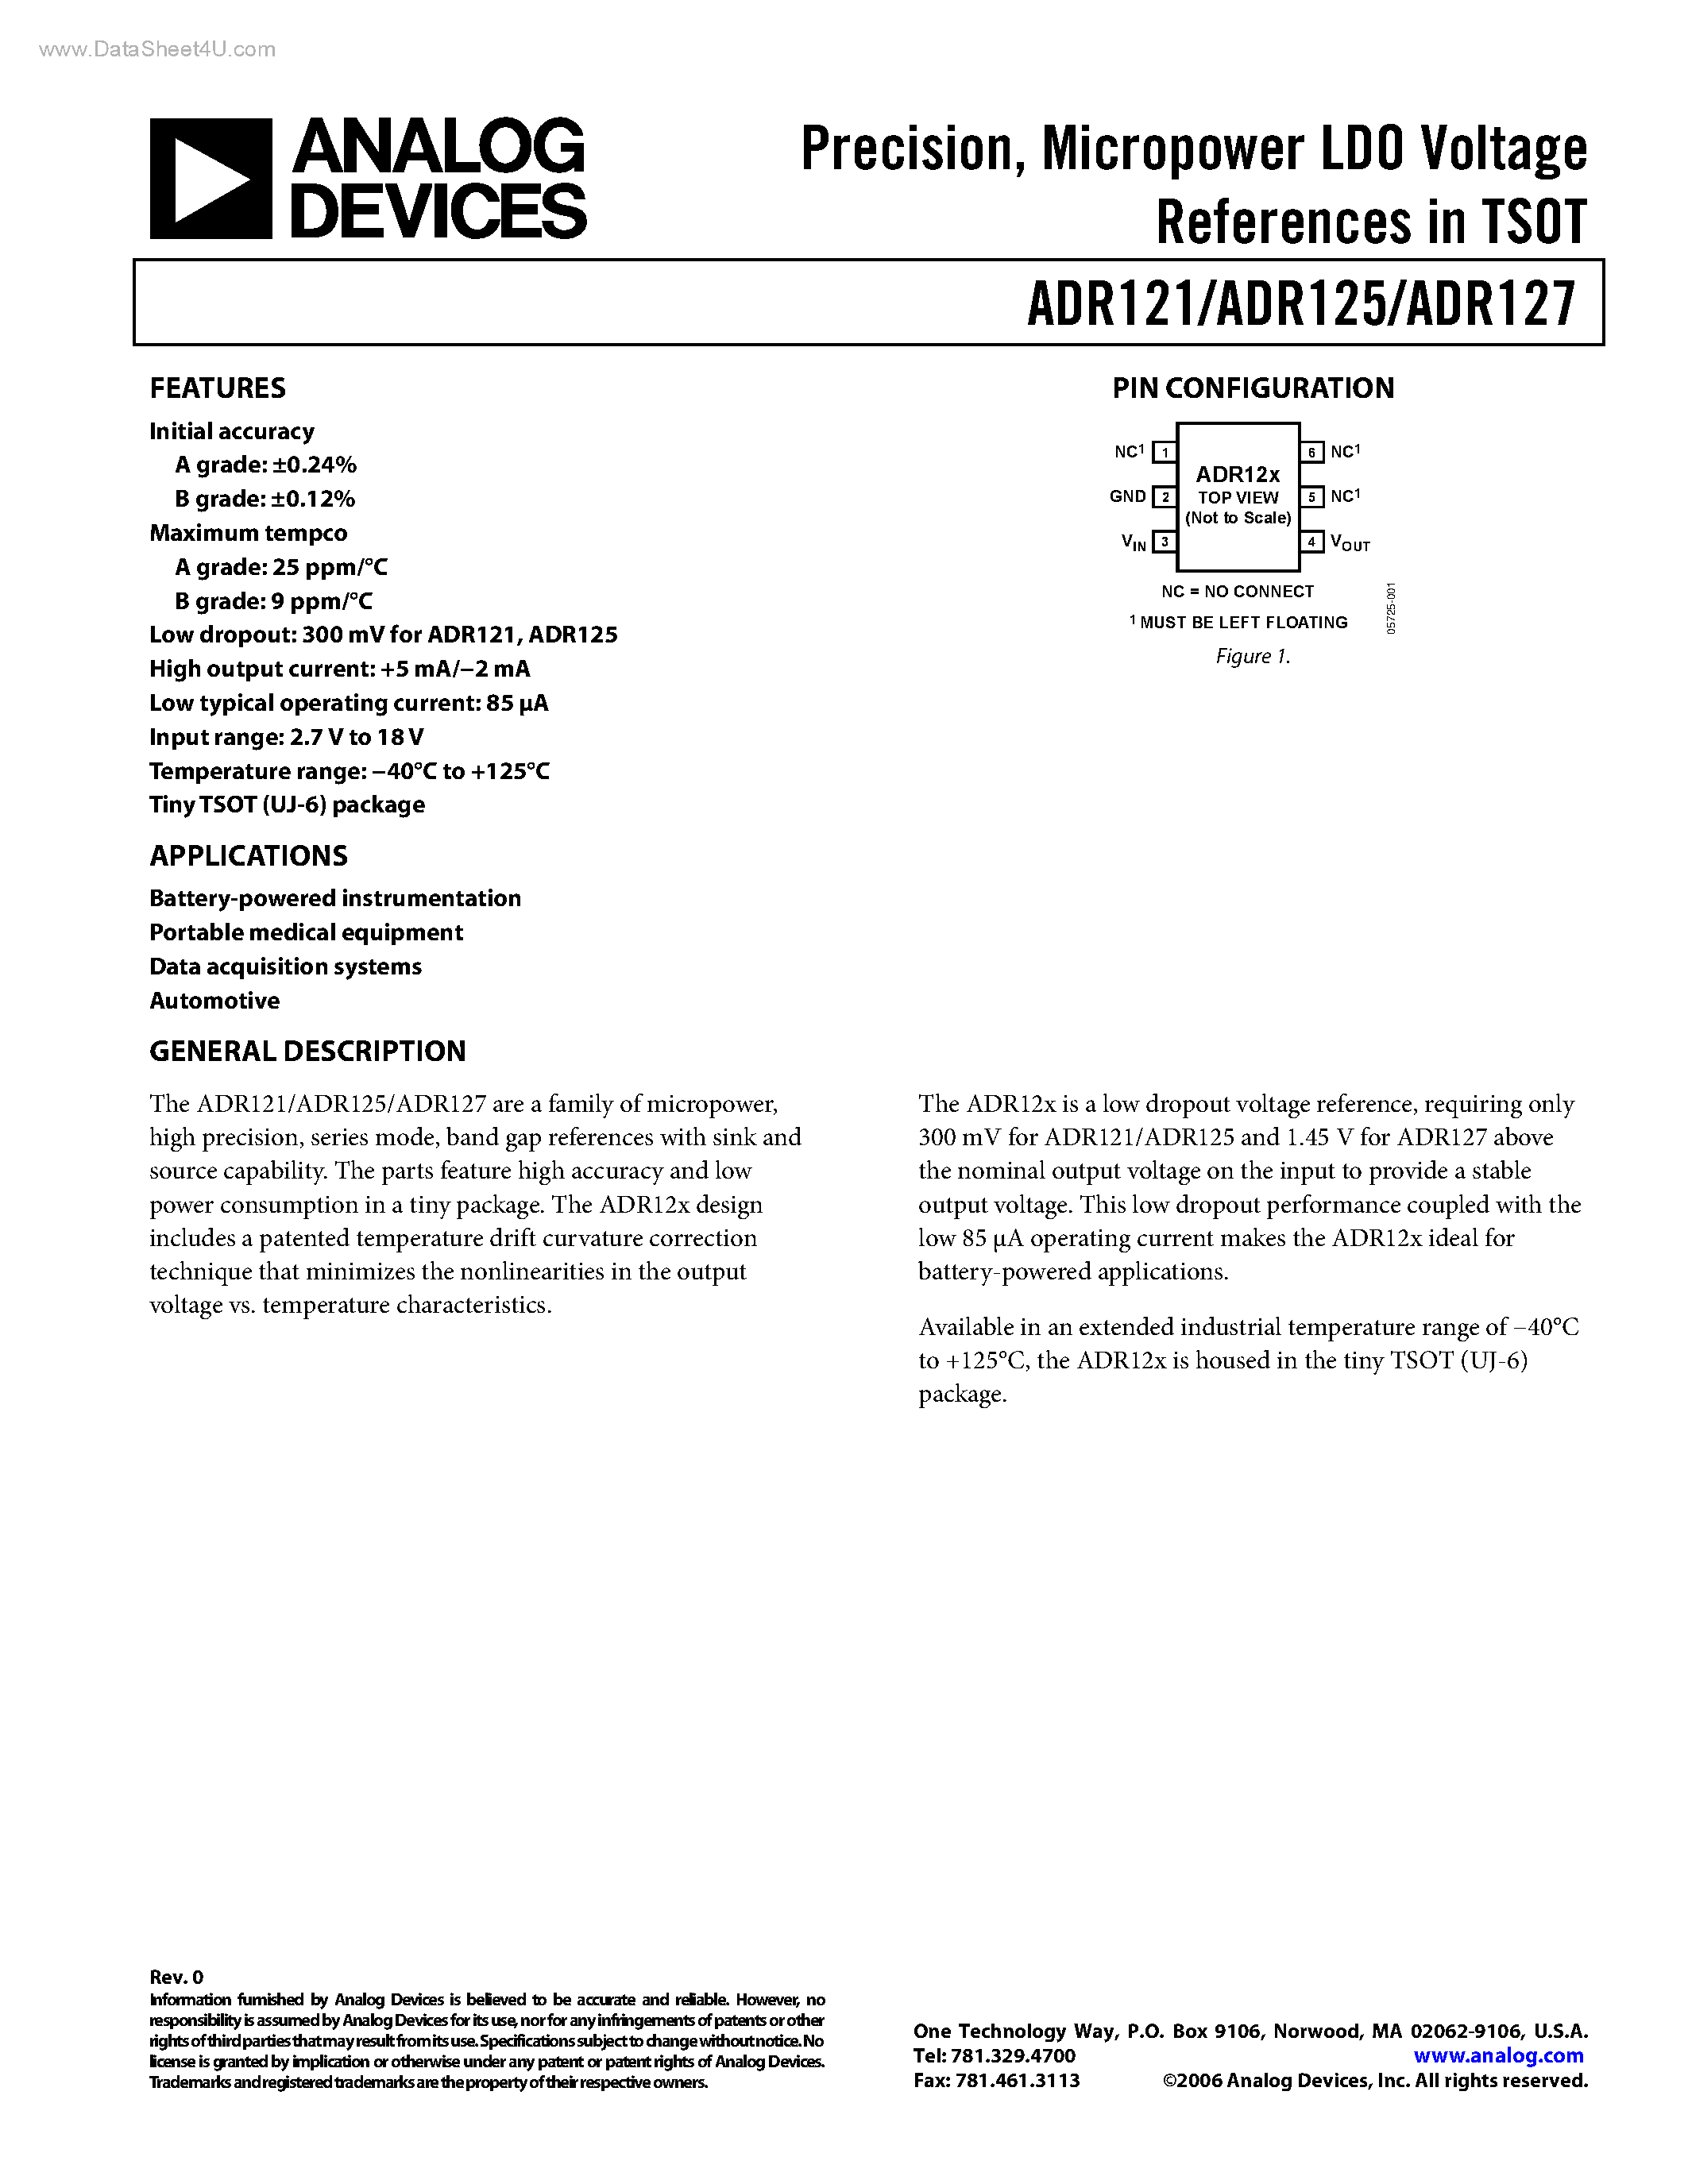 Datasheet ADR121 - (ADR121 - ADR127) Micropower LDO Voltage References page 1